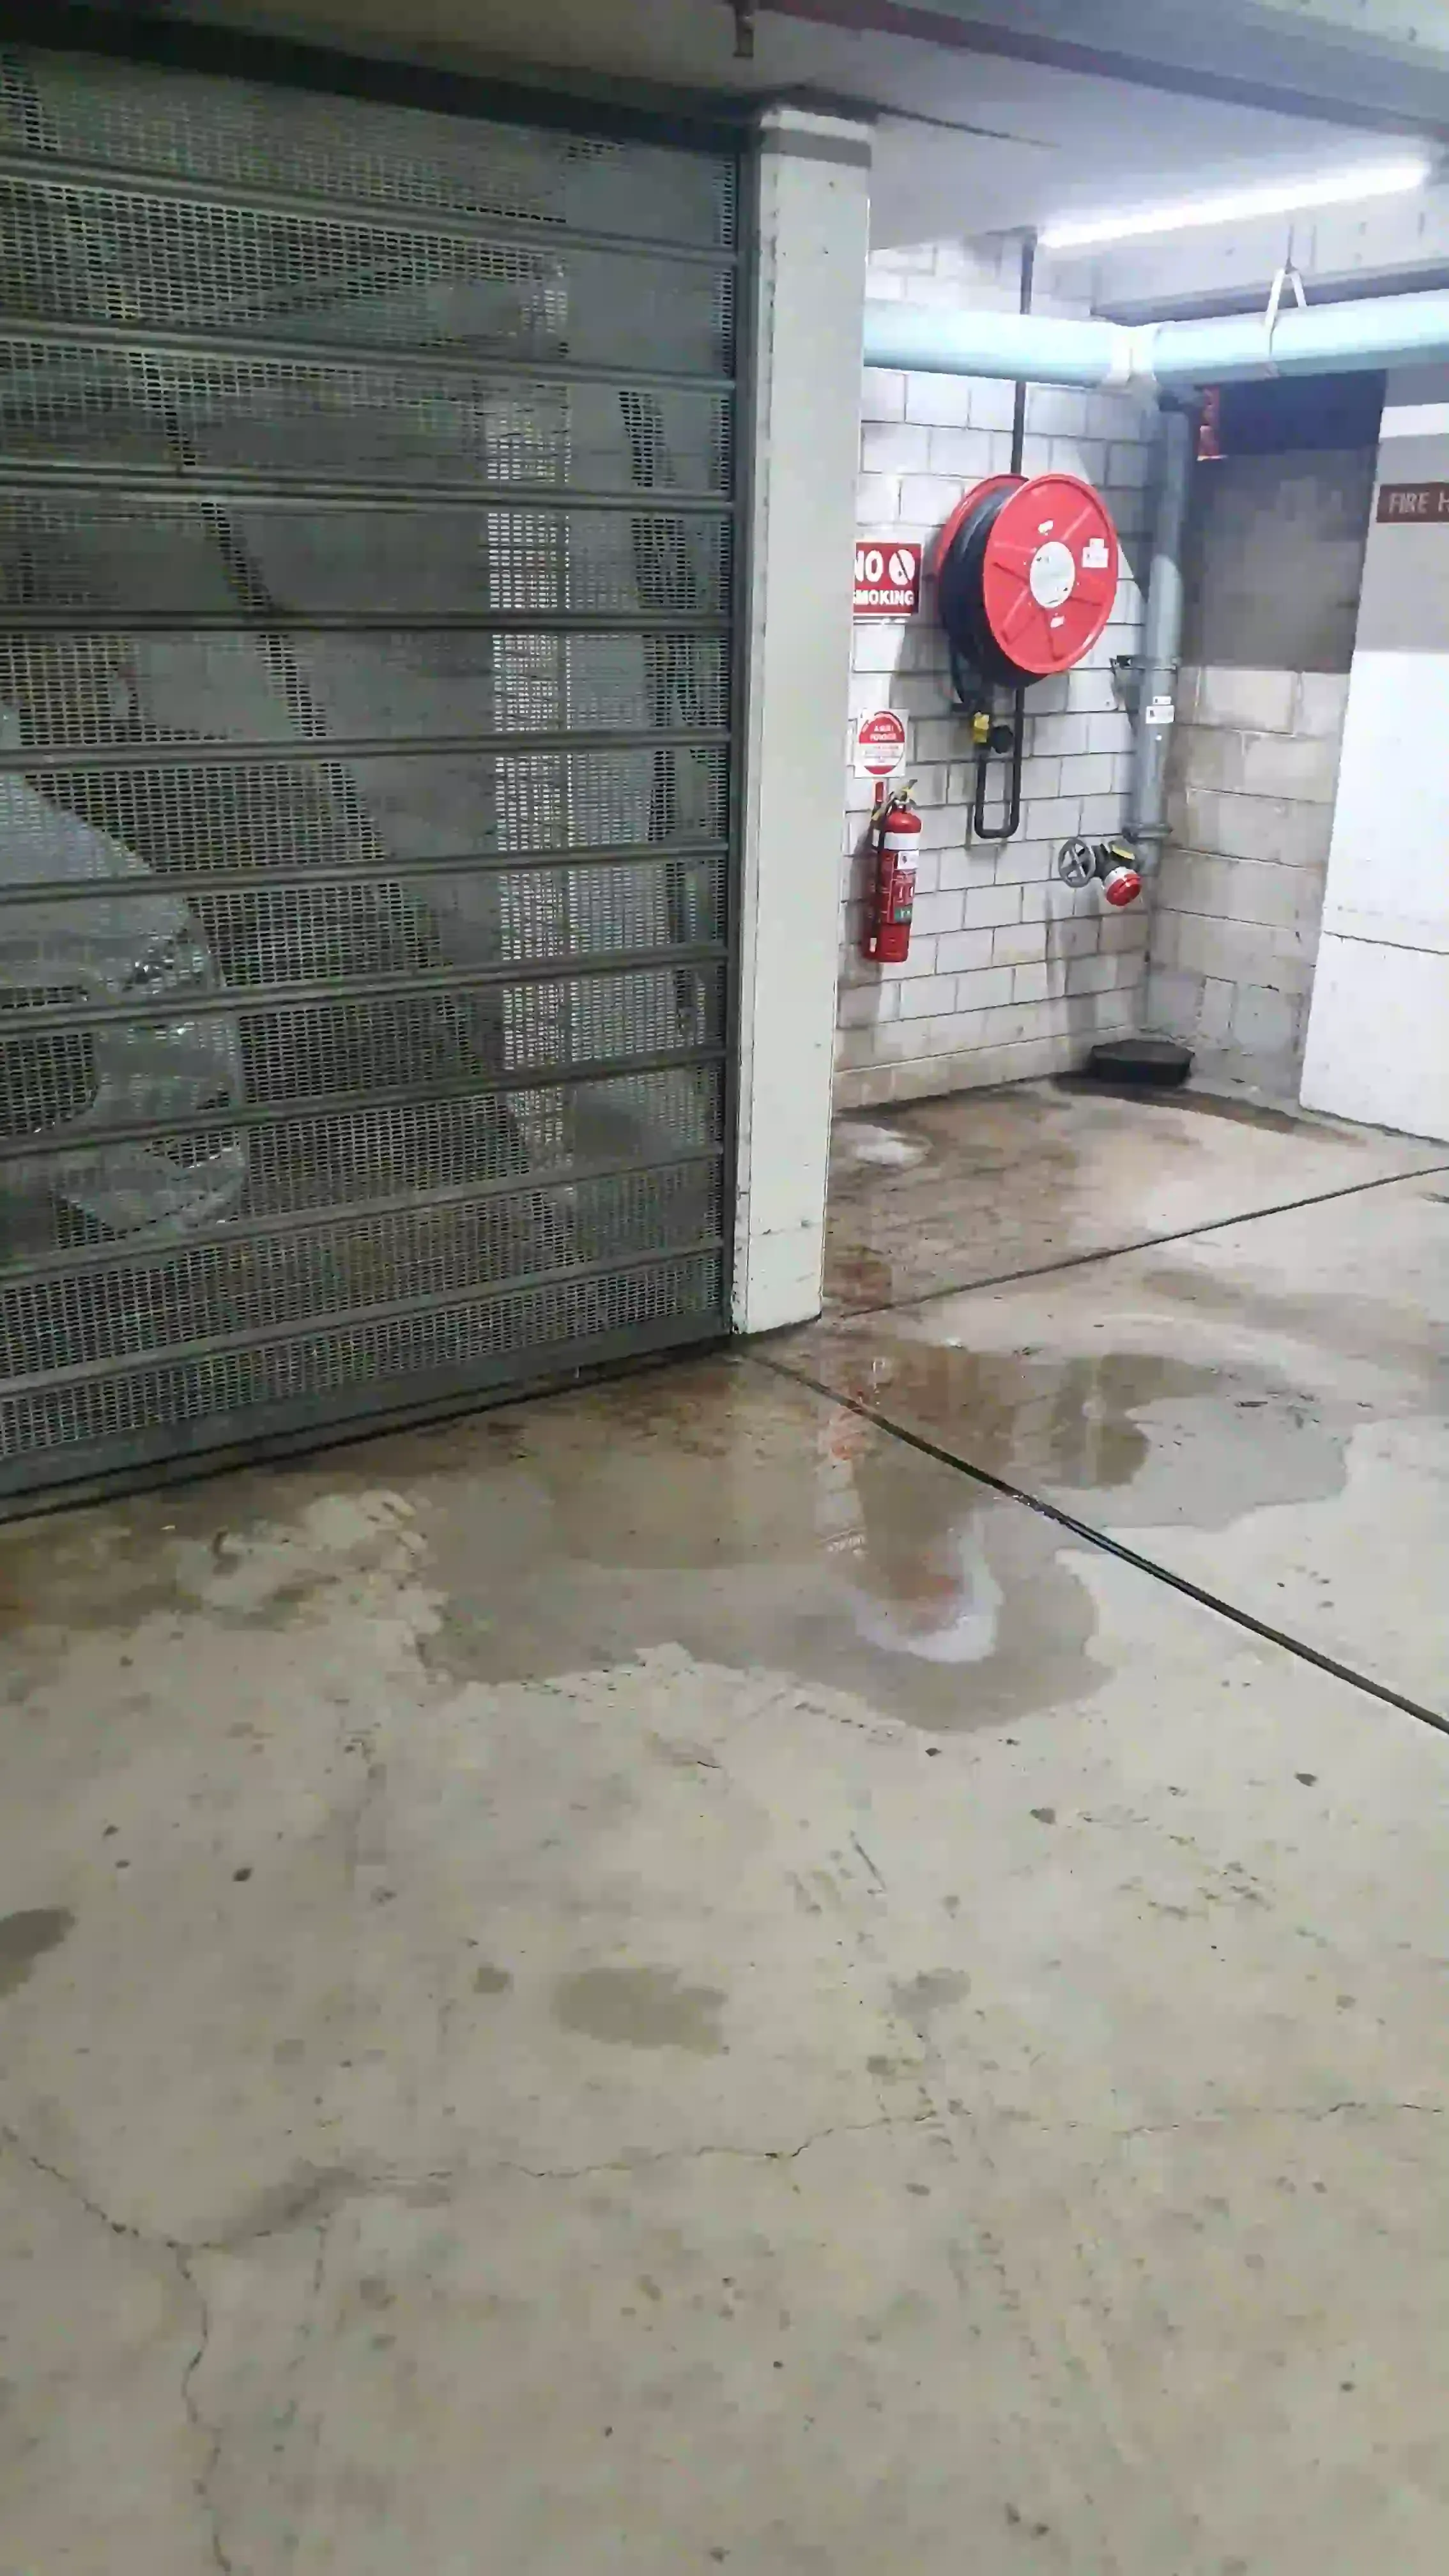 SP52948-examples-of-water-leakages-in-basement-and-garages-photo-50-22Feb2022.webp